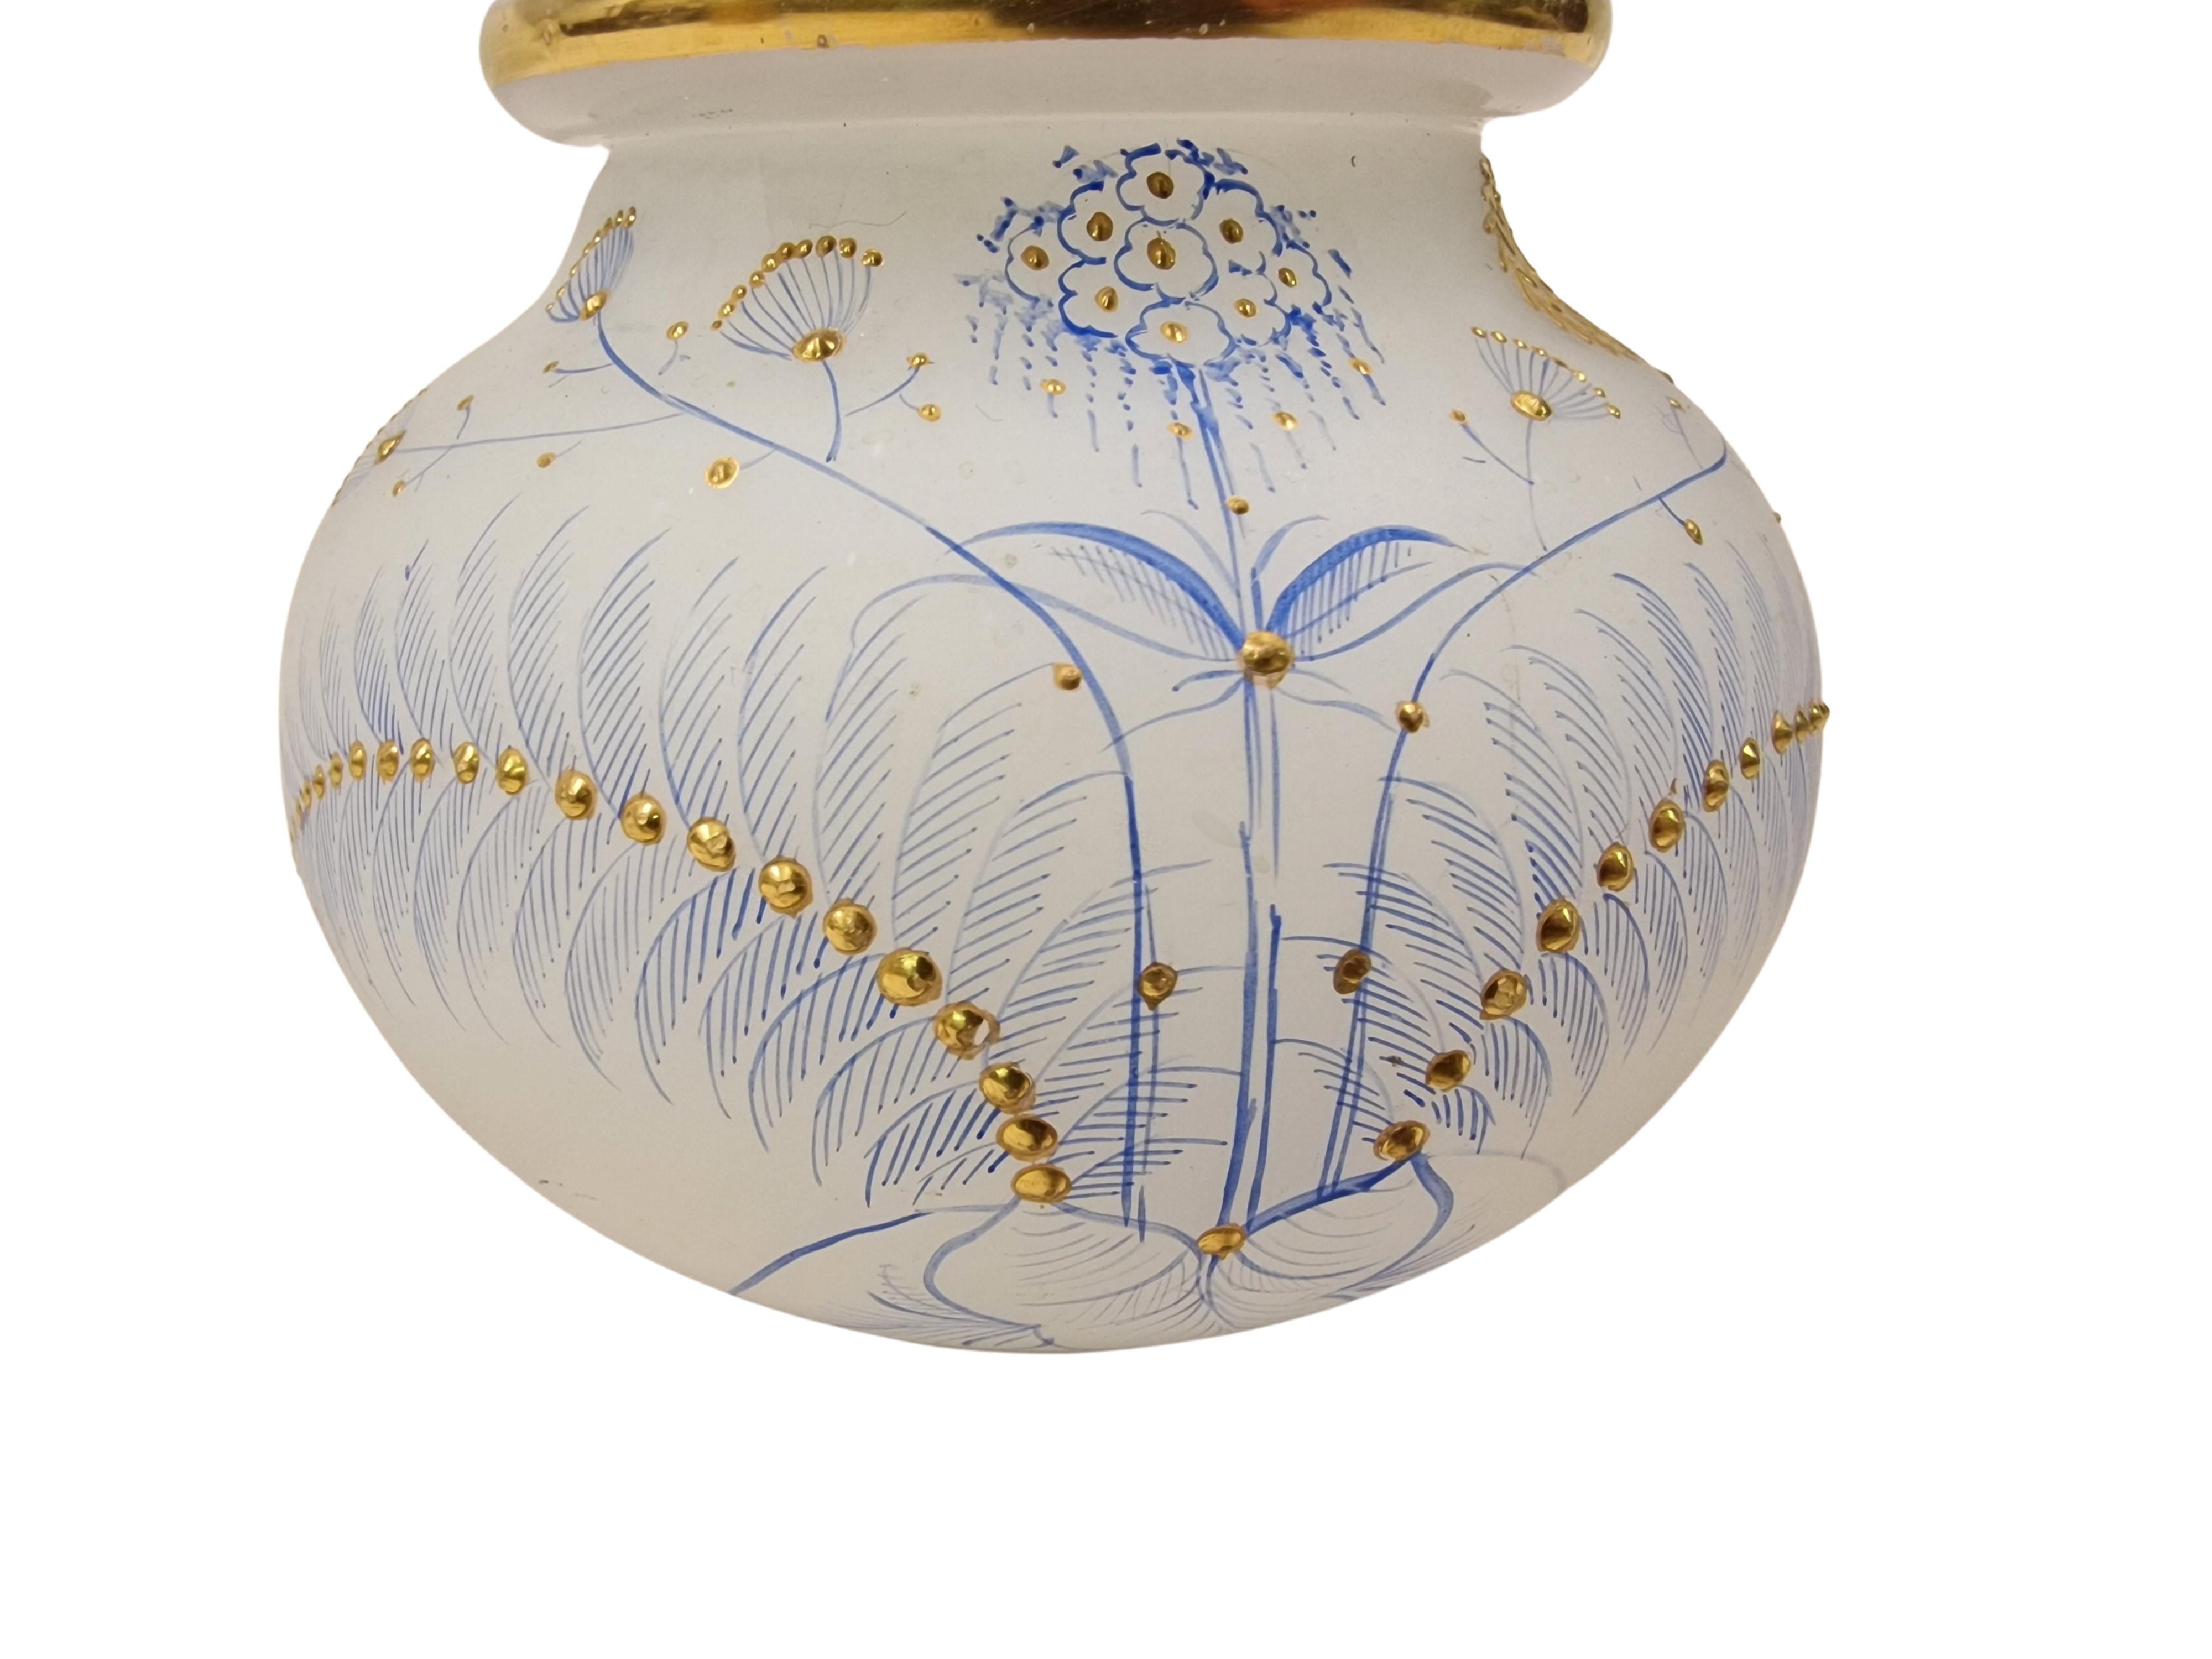 Wonderful serving bottle, opaline glass, a very nice piece from the early Jugendstil era, made in France, around 1895 /1900. 

This mouth blown opaline glass is very thick - a high quality piece. The enchanting depiction of the painting is handmade.